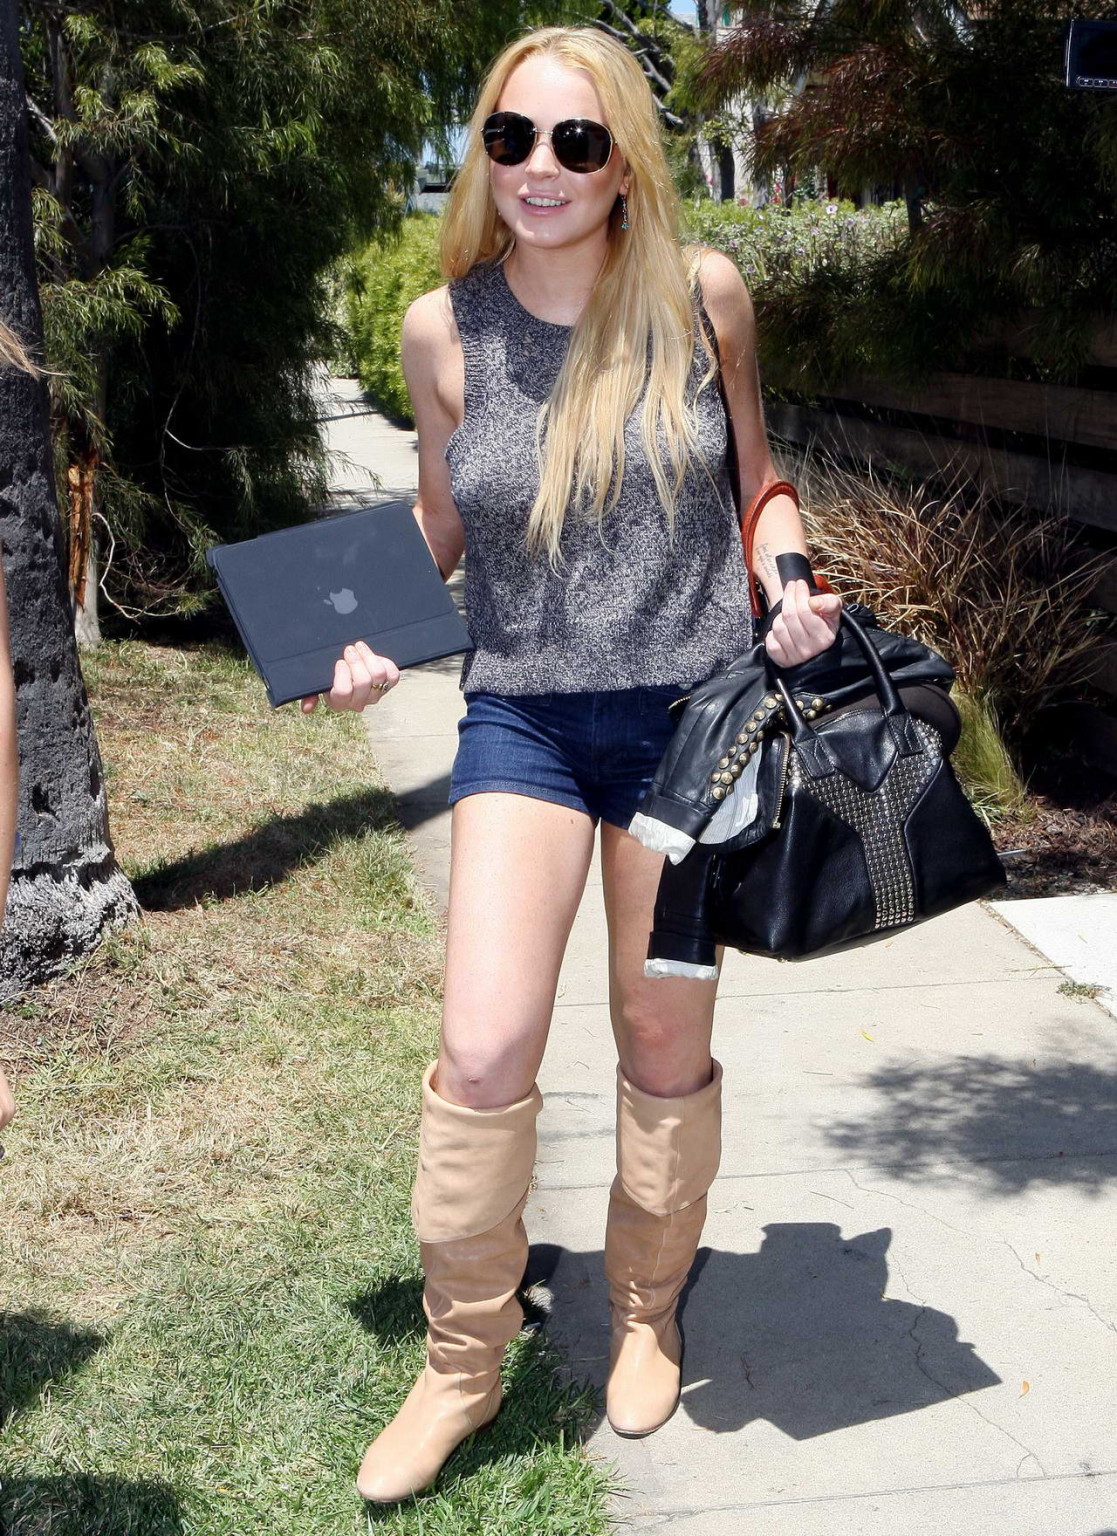 Lindsay Lohan leggy in shorts  boots heading to a pool party in Pacific Palisade #75347234